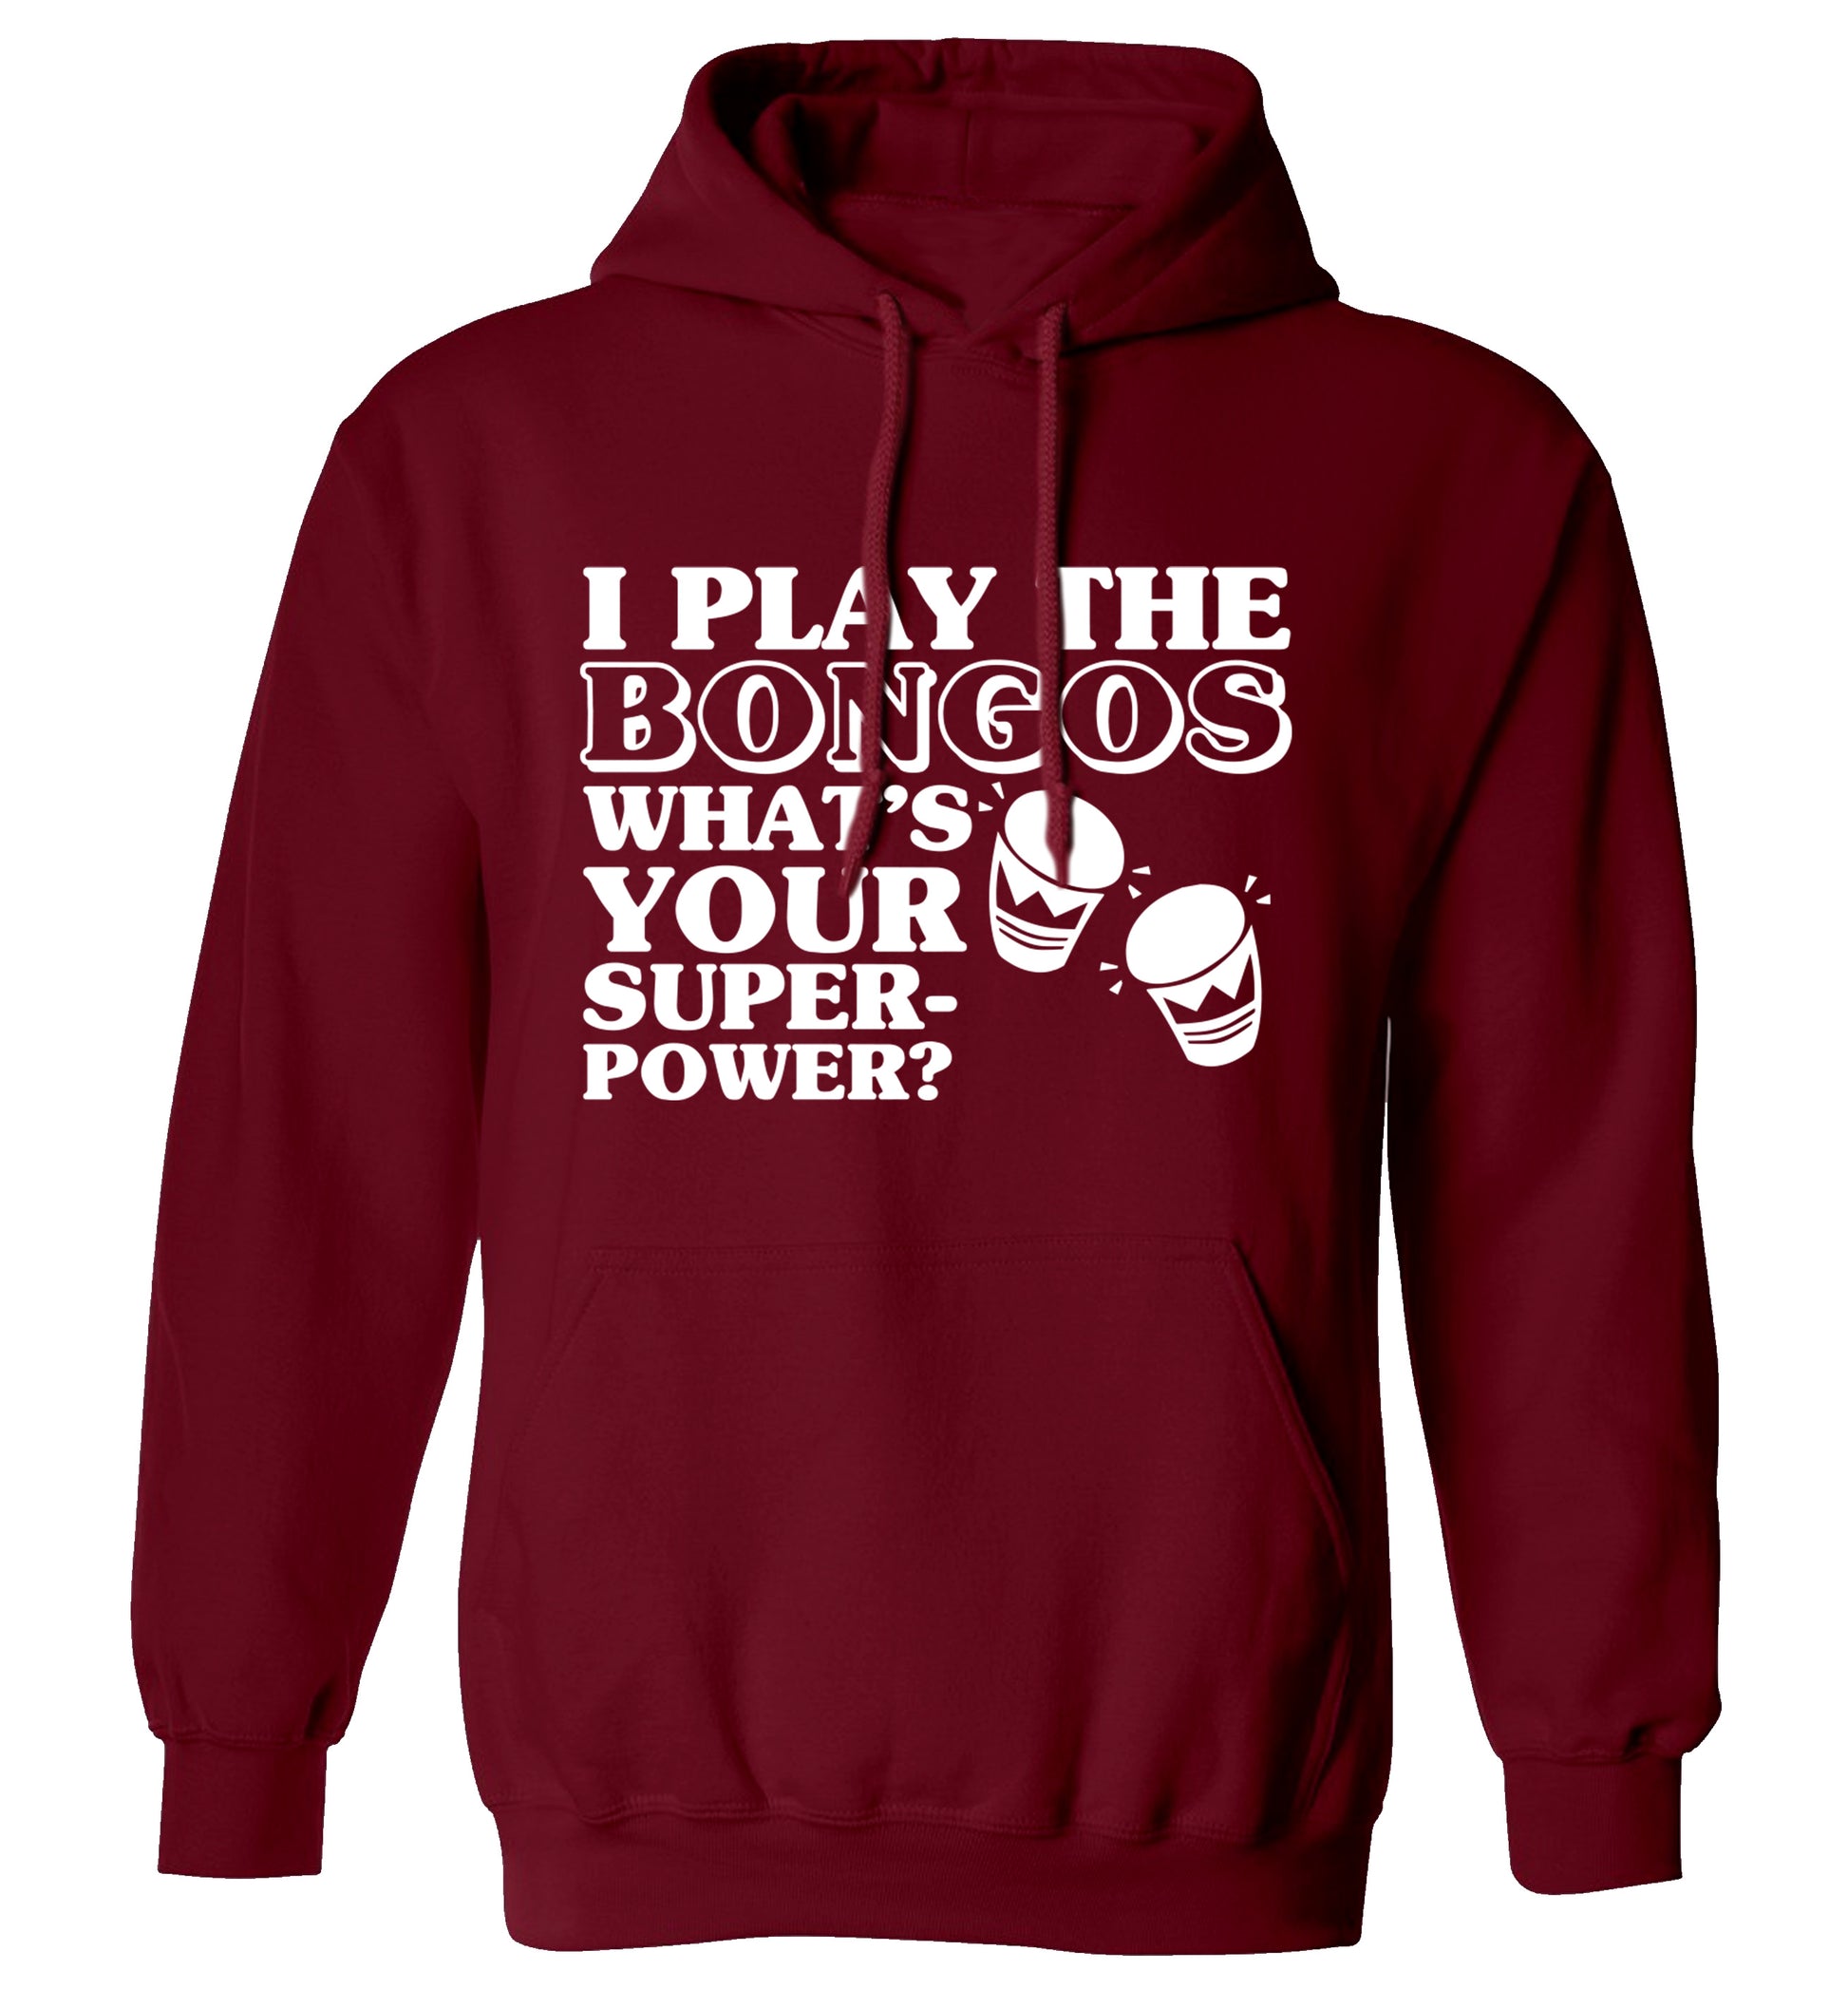 I play the bongos what's your superpower? adults unisexmaroon hoodie 2XL